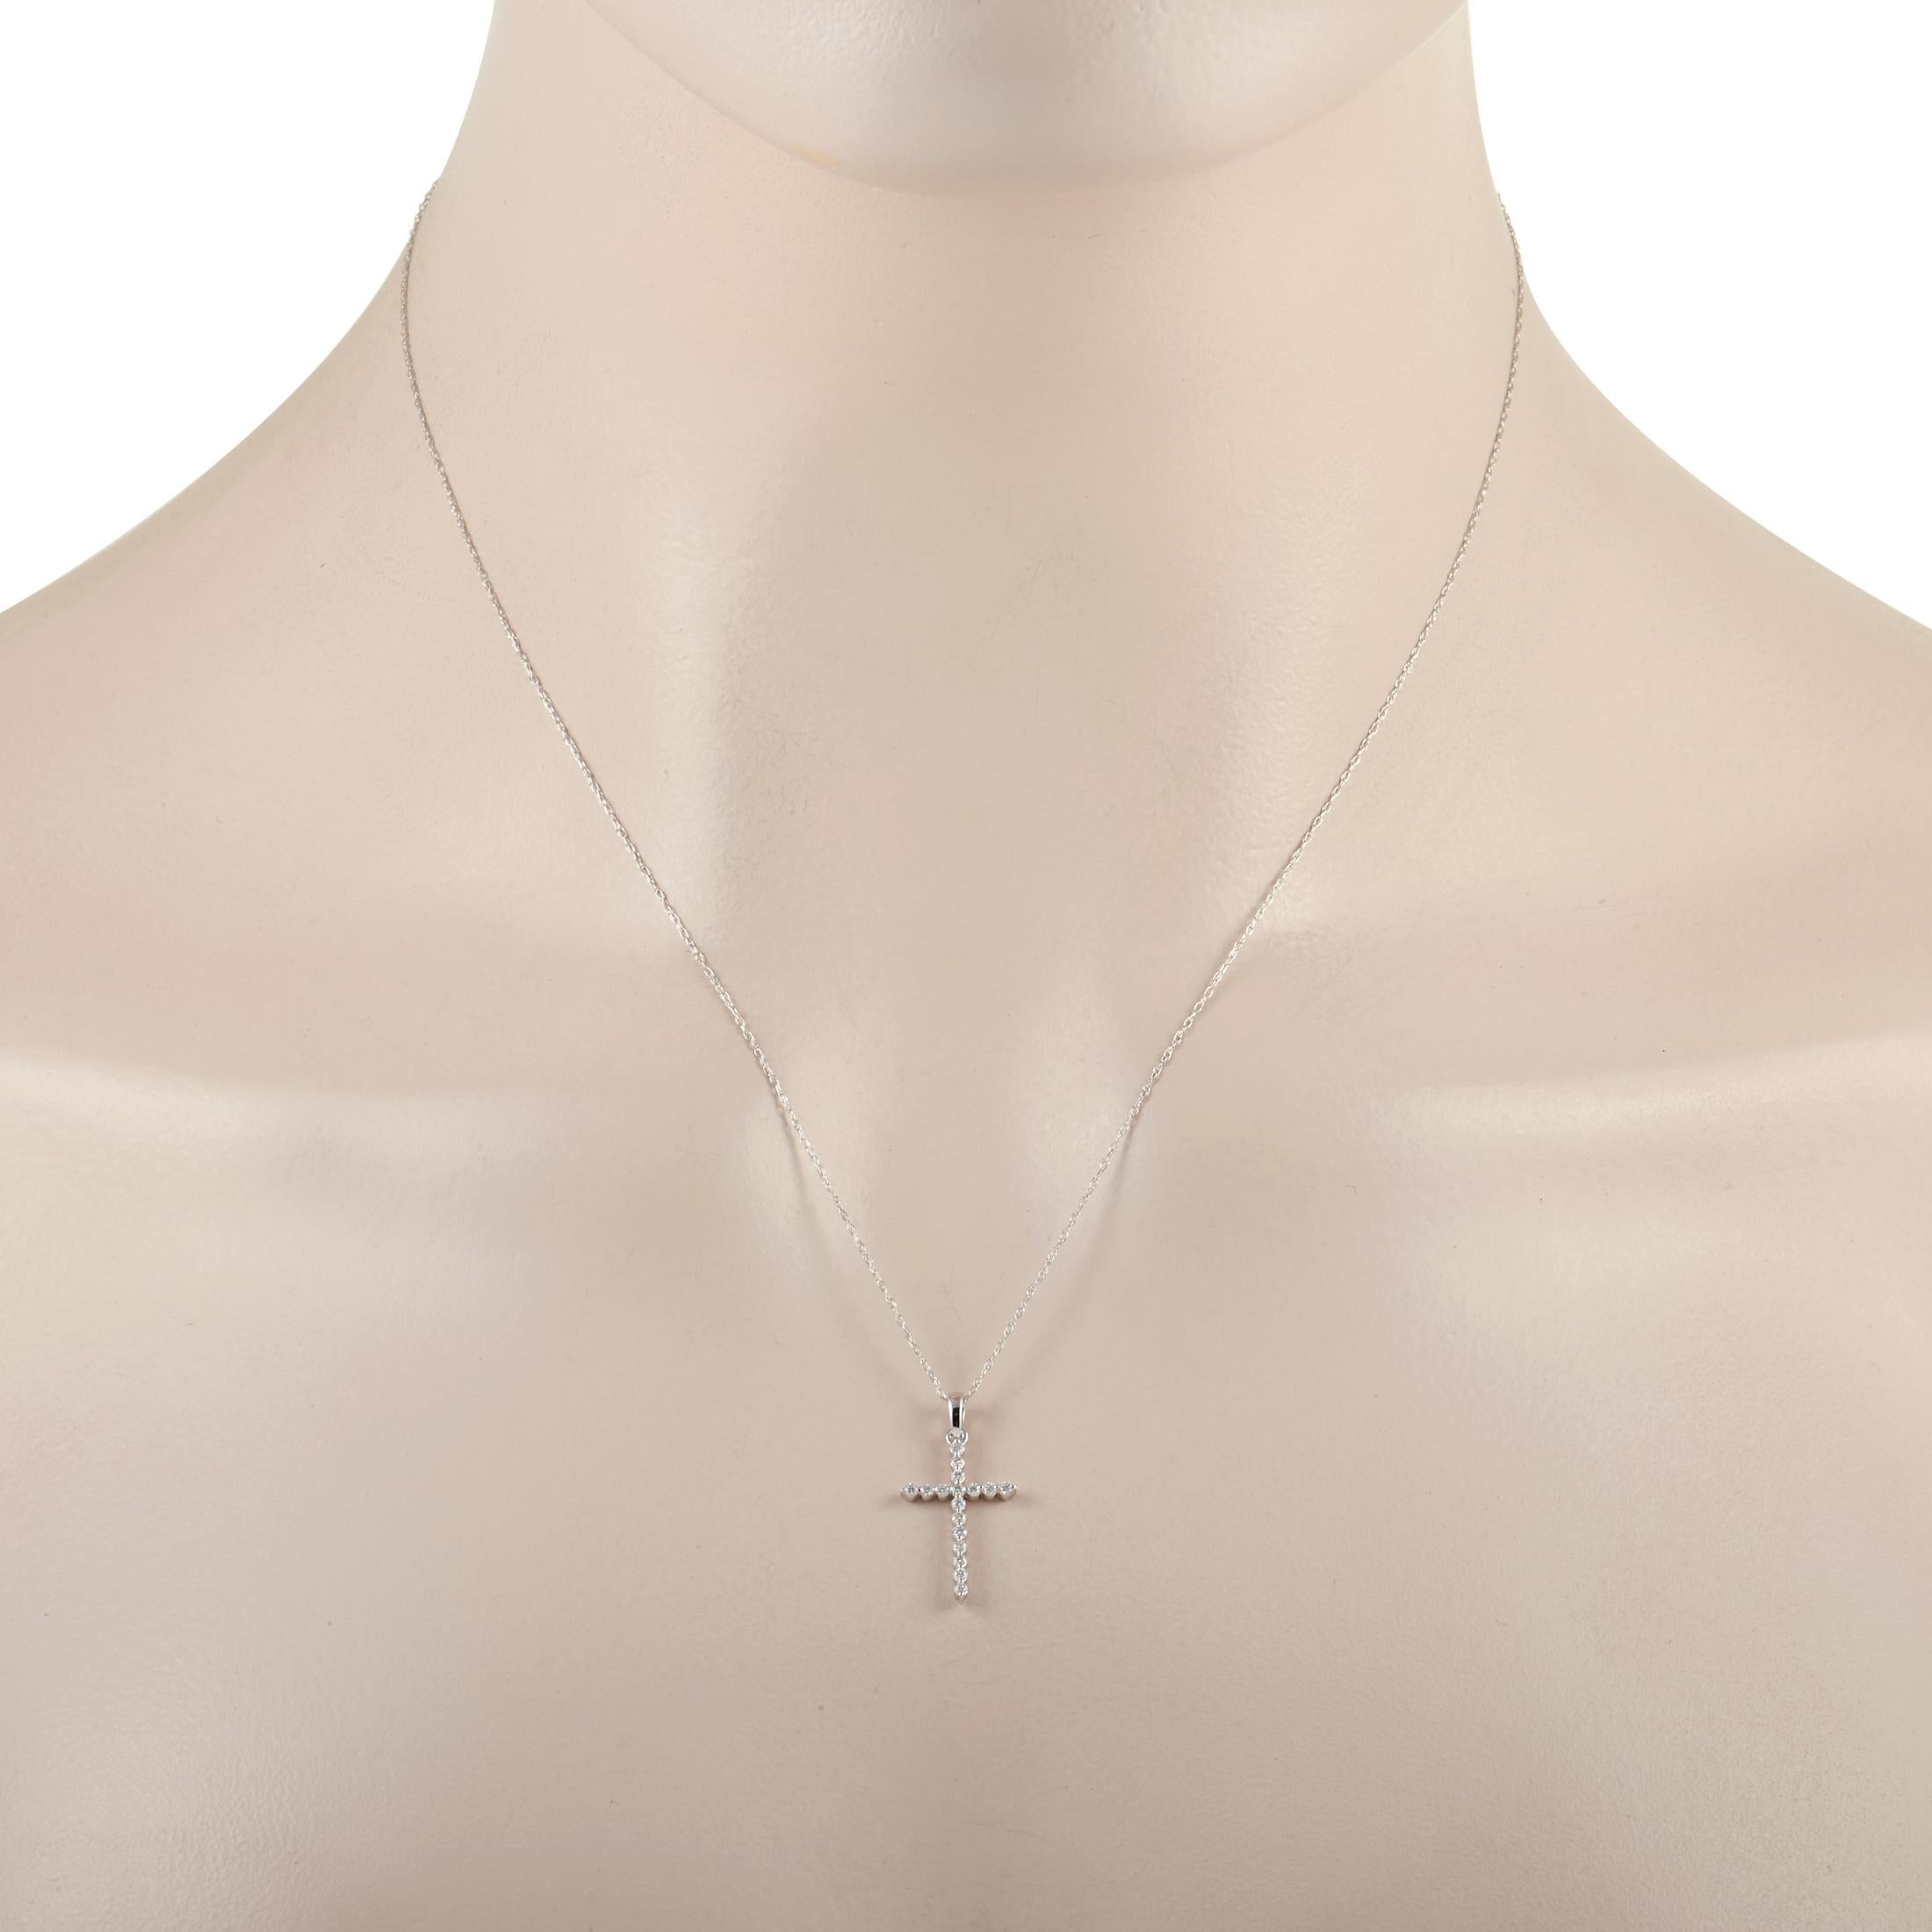 Keep it simple and stylish with this striking pendant necklace. A 14K White Gold setting provides the perfect foundation for this piece’s cross shaped pendant, which measures .88” long and .44” wide. It’s crafted entirely from shimmering round cut